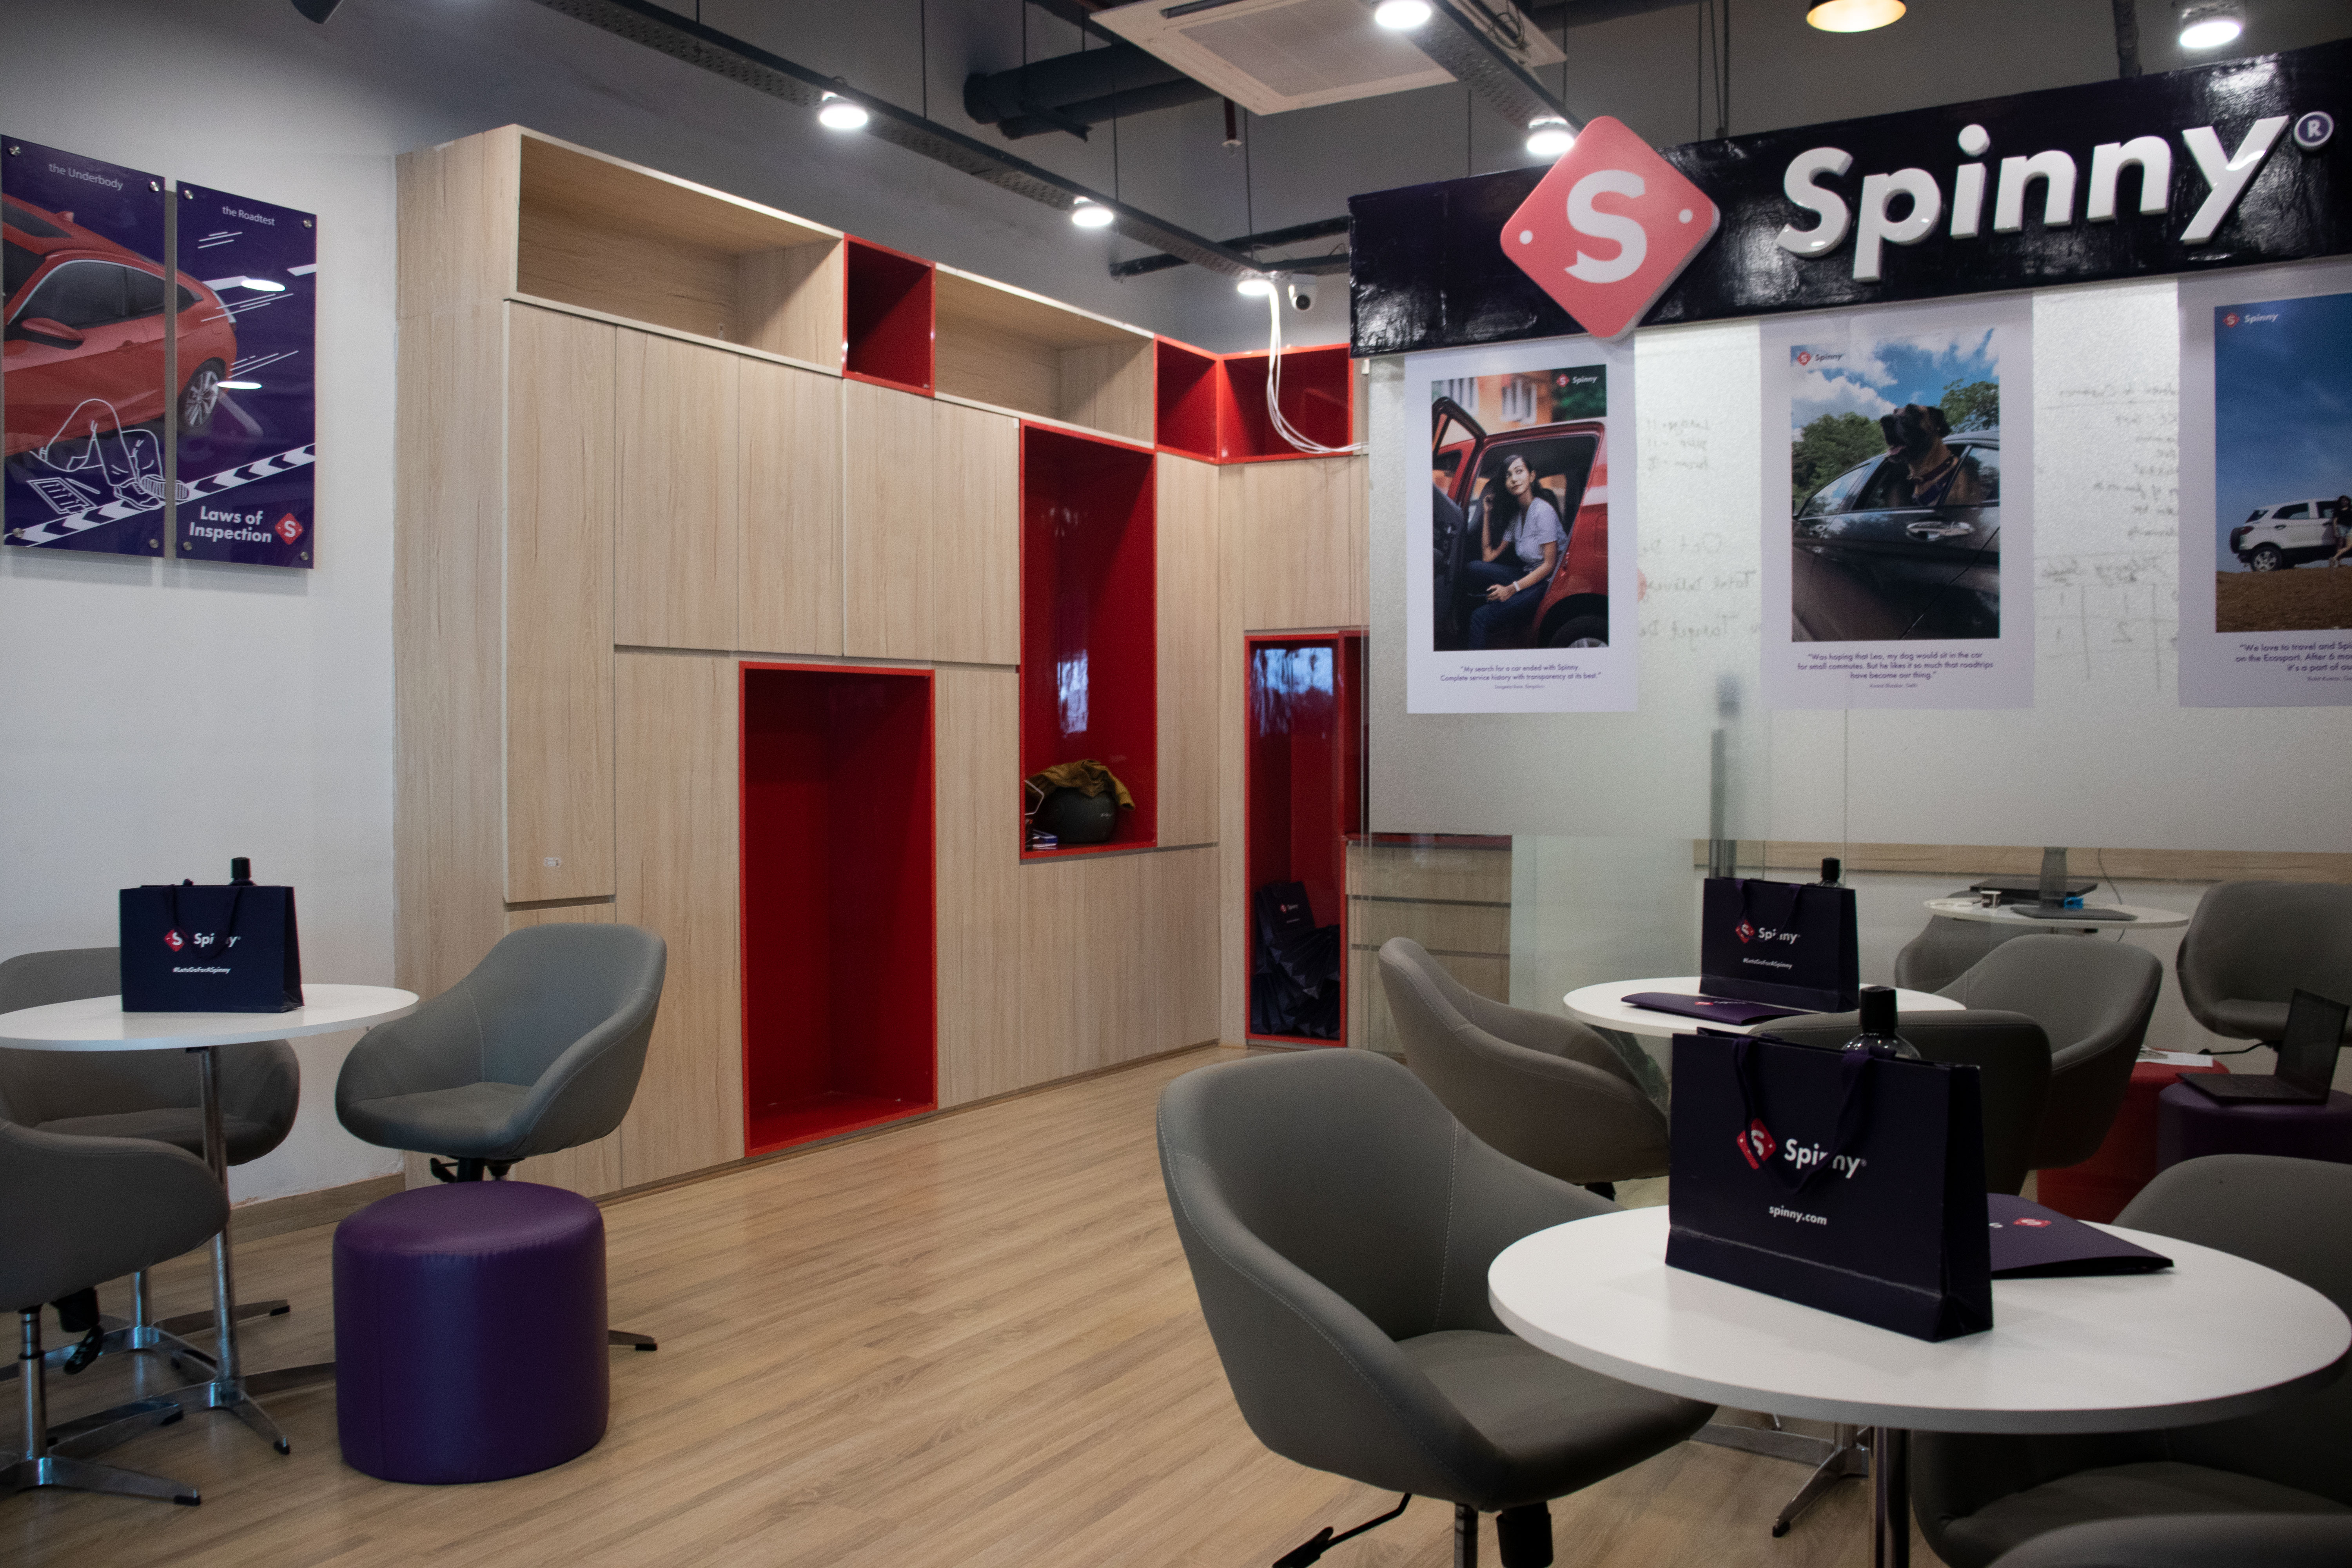 Used Car buying platform Spinny® expands footprints by entering Jaipur decoding=